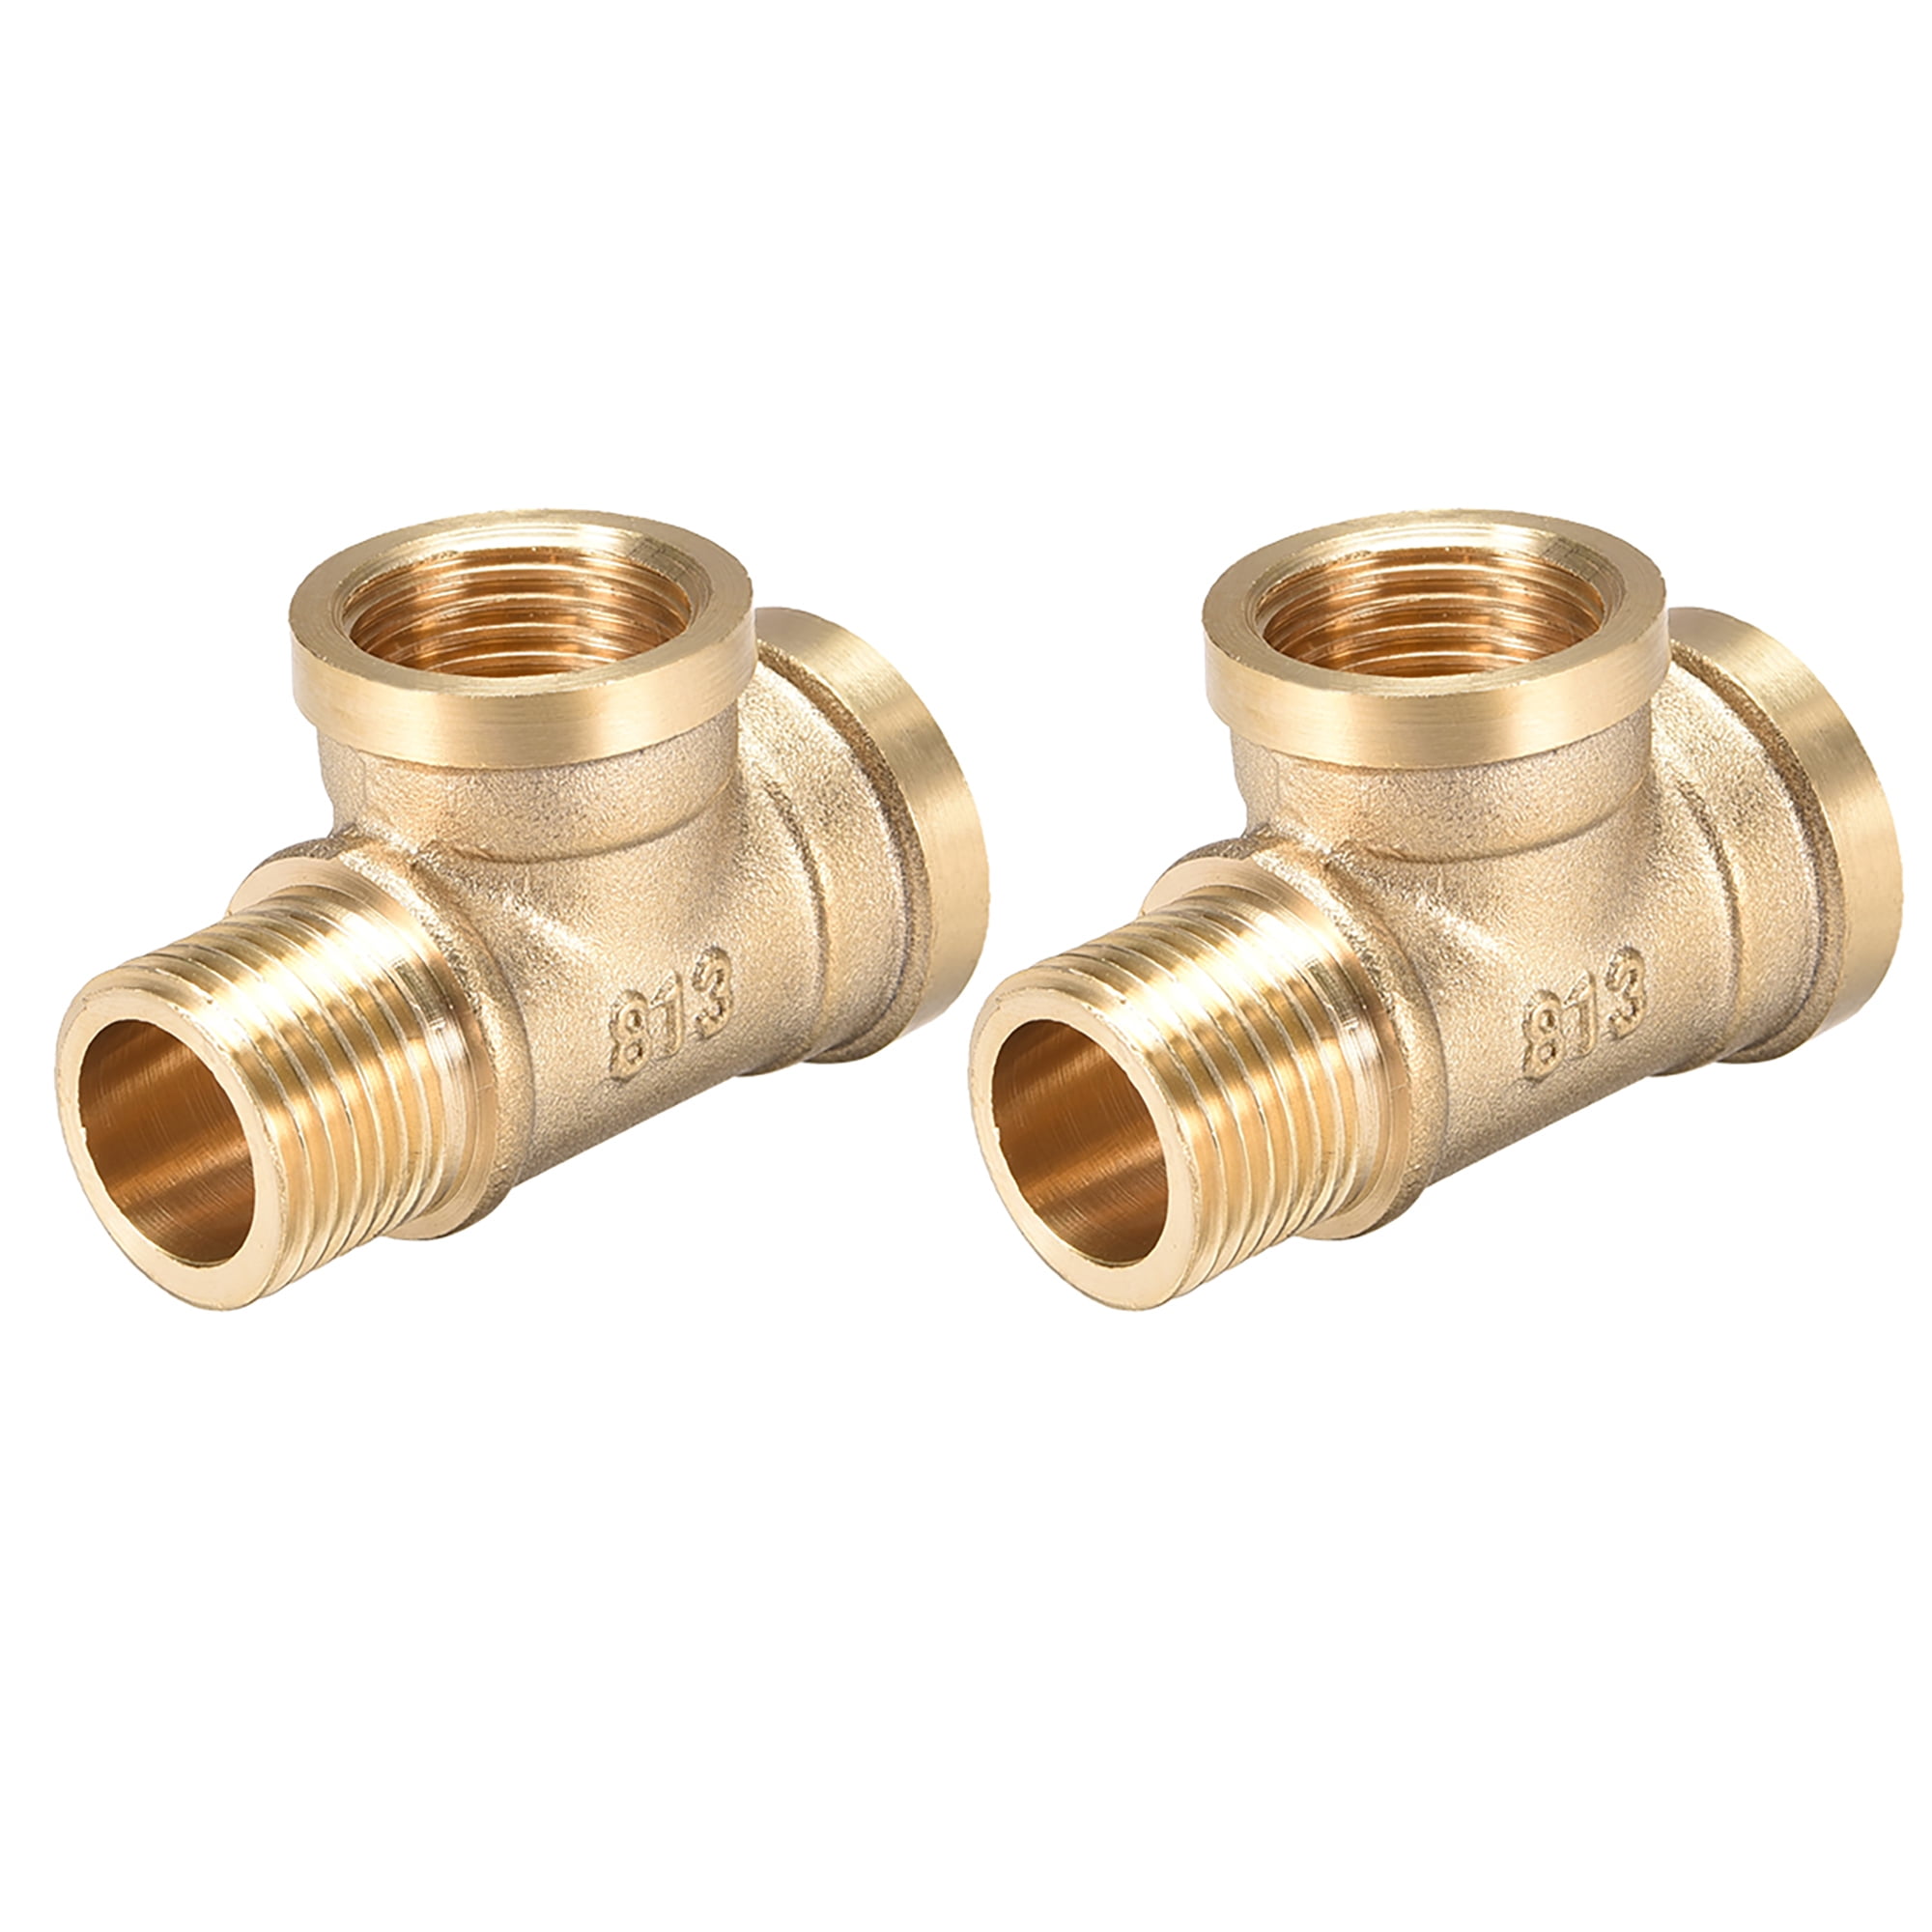 Brass Tee Pipe Fitting G1/2 Male x G1/2  Female x G1/2 Male T Shaped Connector 